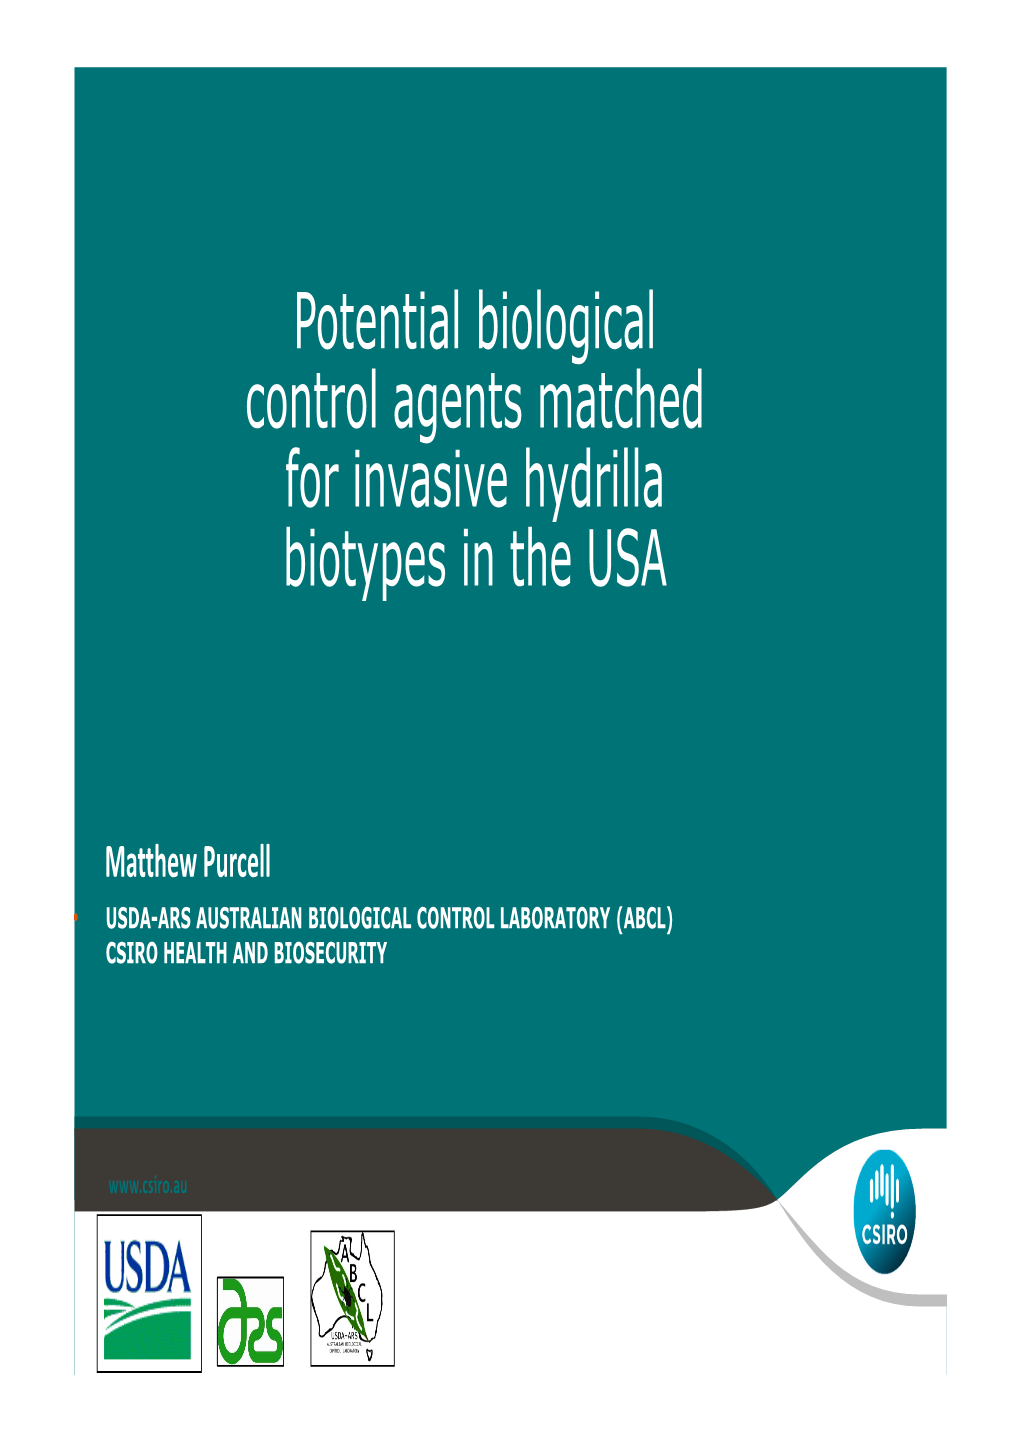 Potential Biological Control Agents Matched for Invasive Hydrilla Biotypes in the USA